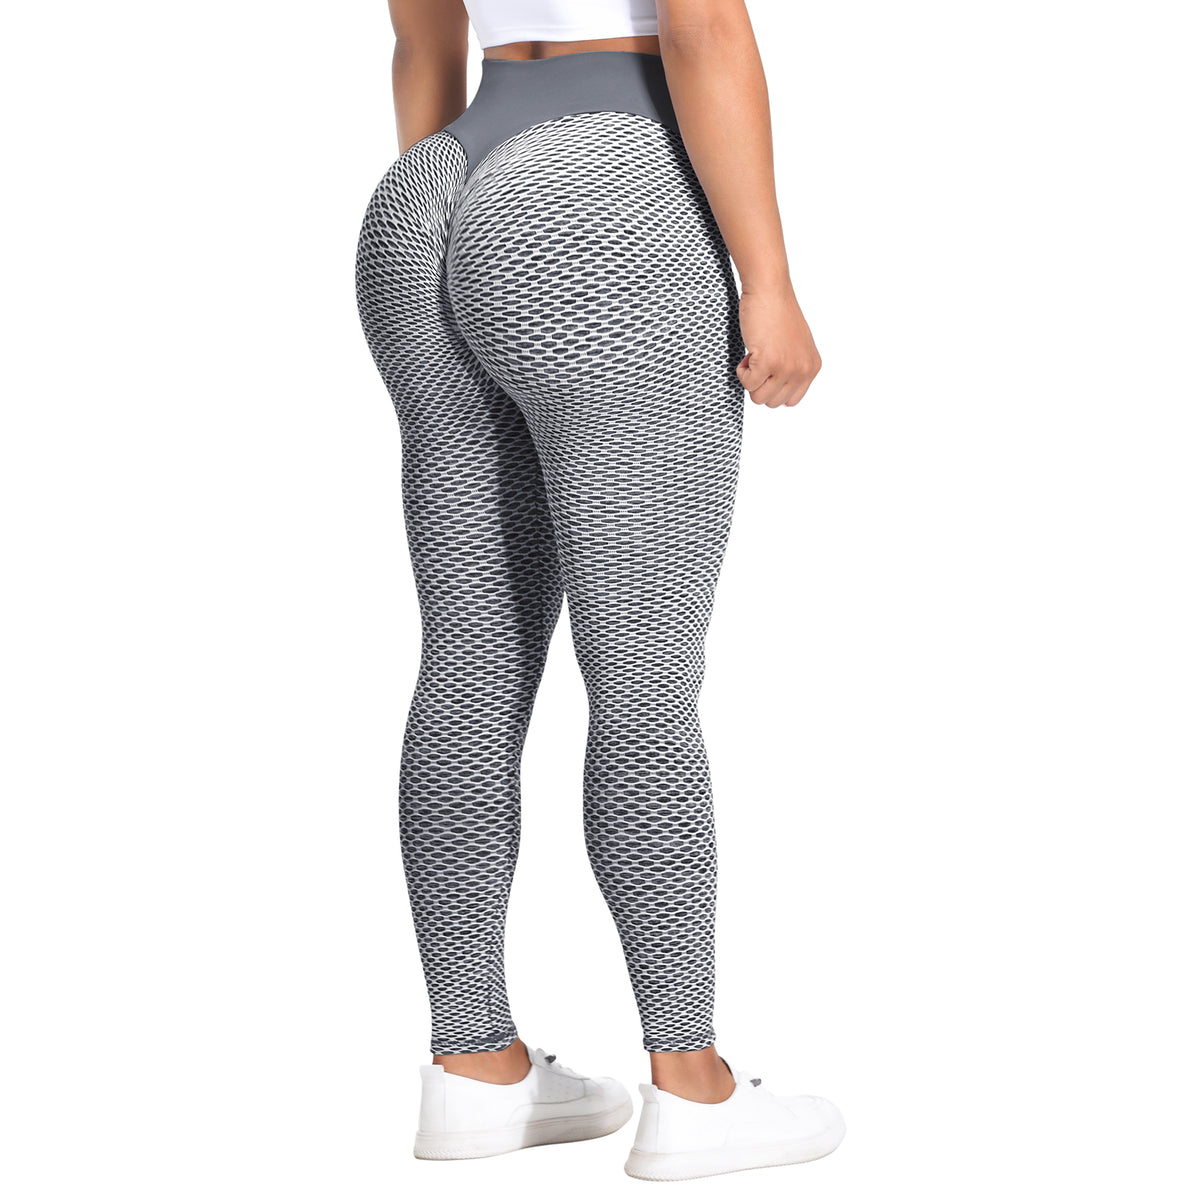 WOMEN'S HIGH WAIST LEGGINGS WITH POCKET ES9 - CABRALLY